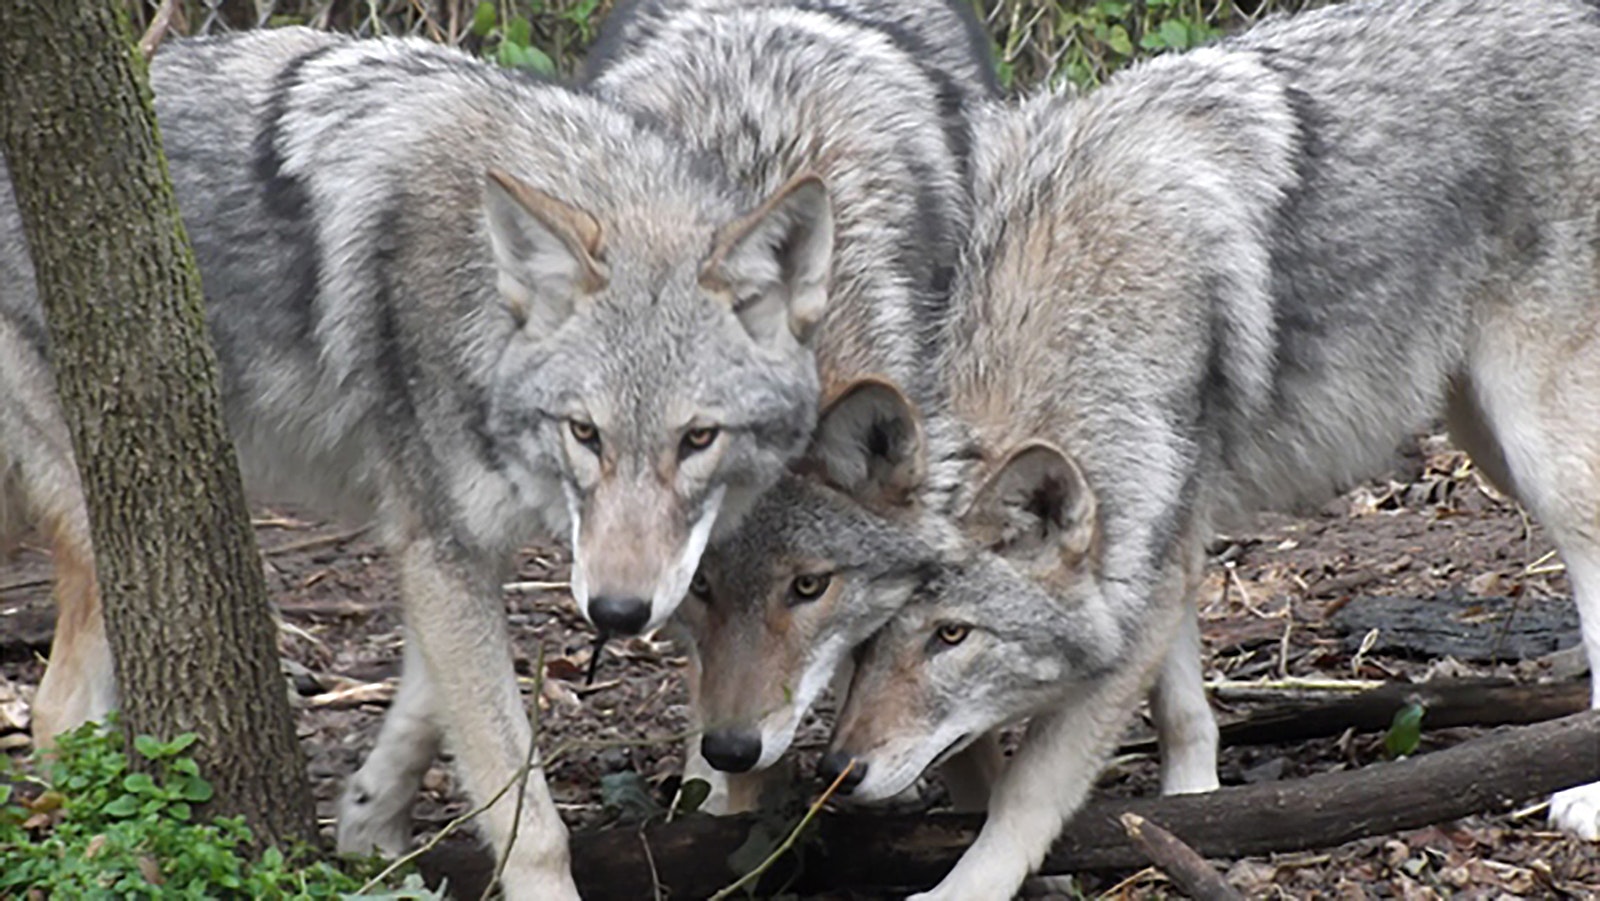 A group of coyote-wolf hybrids, commonly called coywolves, at the Wildlife Science Center in Forest Lake Minnesota.